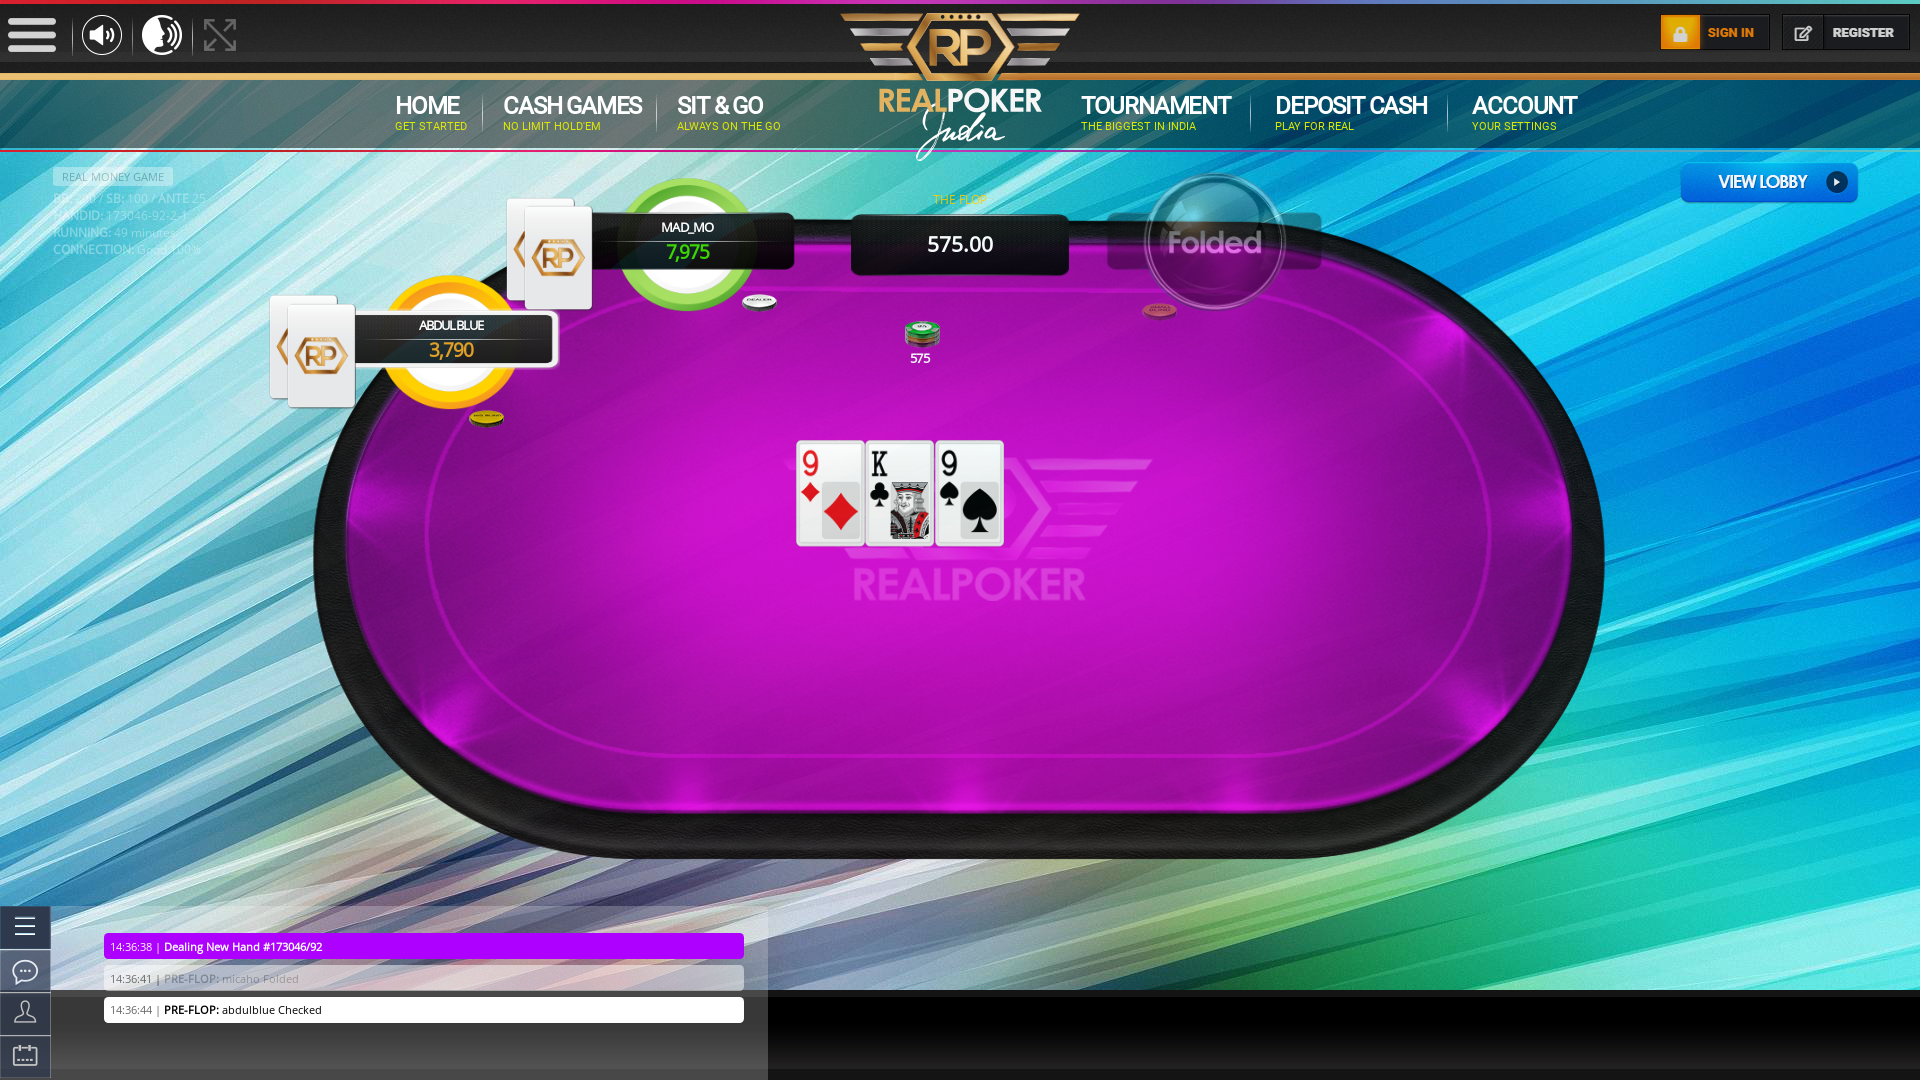 The 91st hand dealt between abdulblue, Mad_Mo, micaho,  on poker india